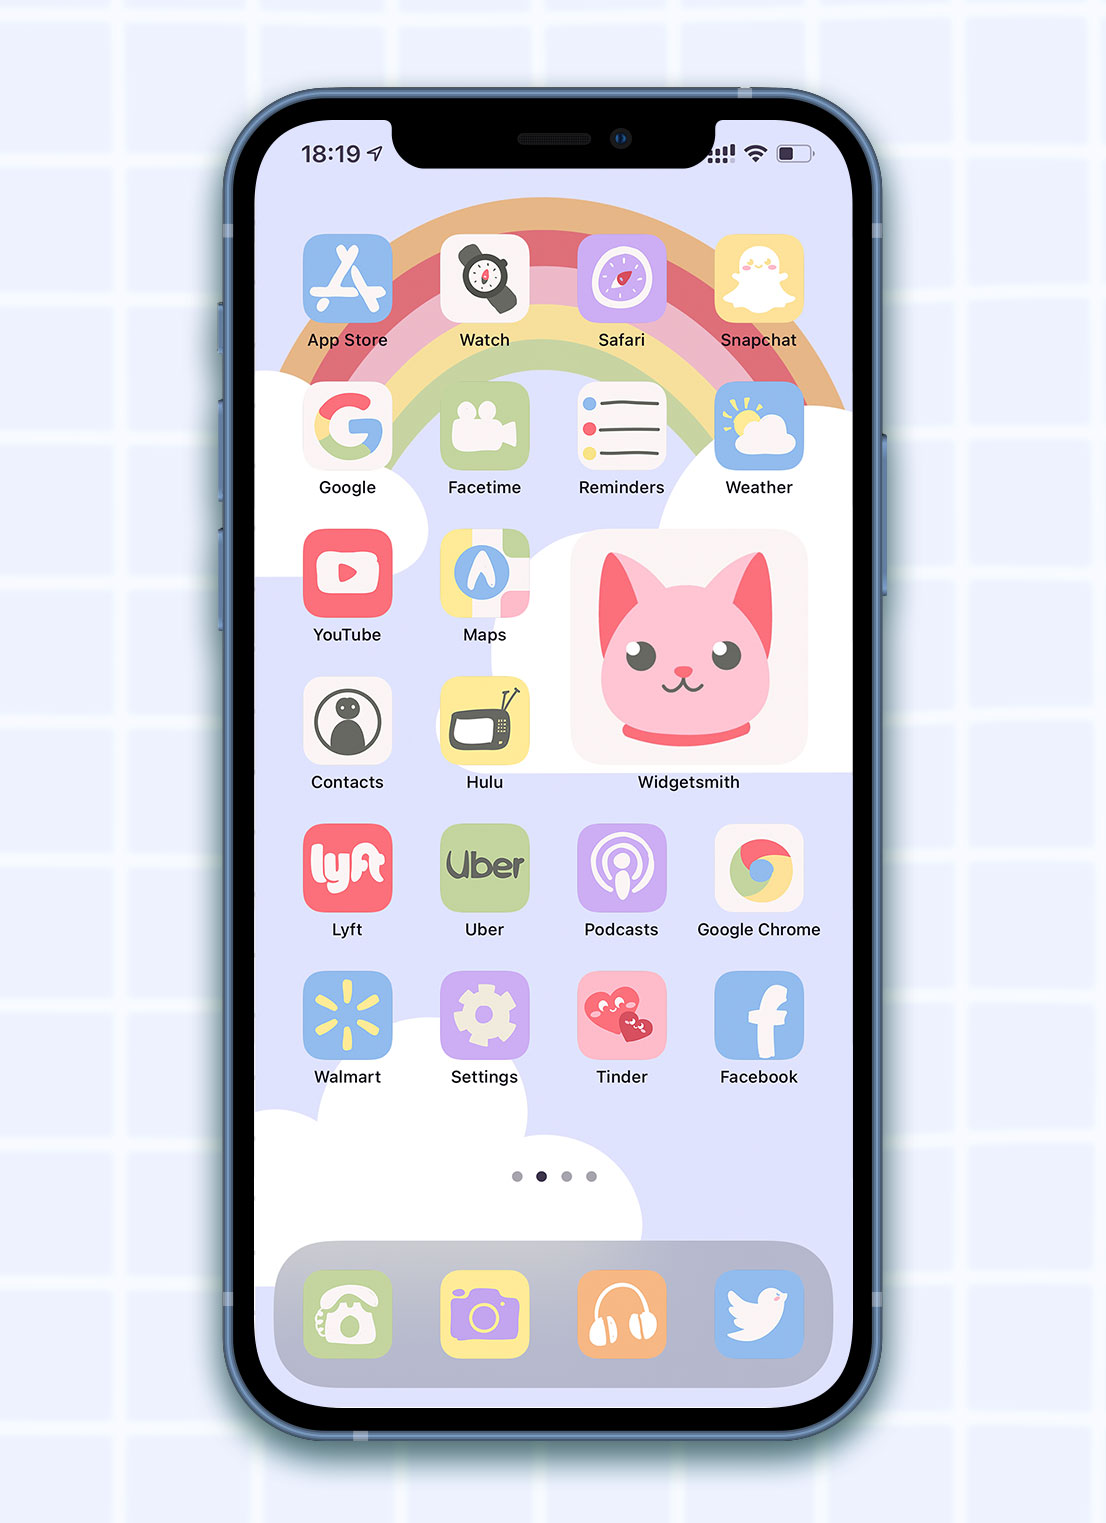 Cute Doodle App Icons for iOS & Android - Aesthetic Pastel App Icons